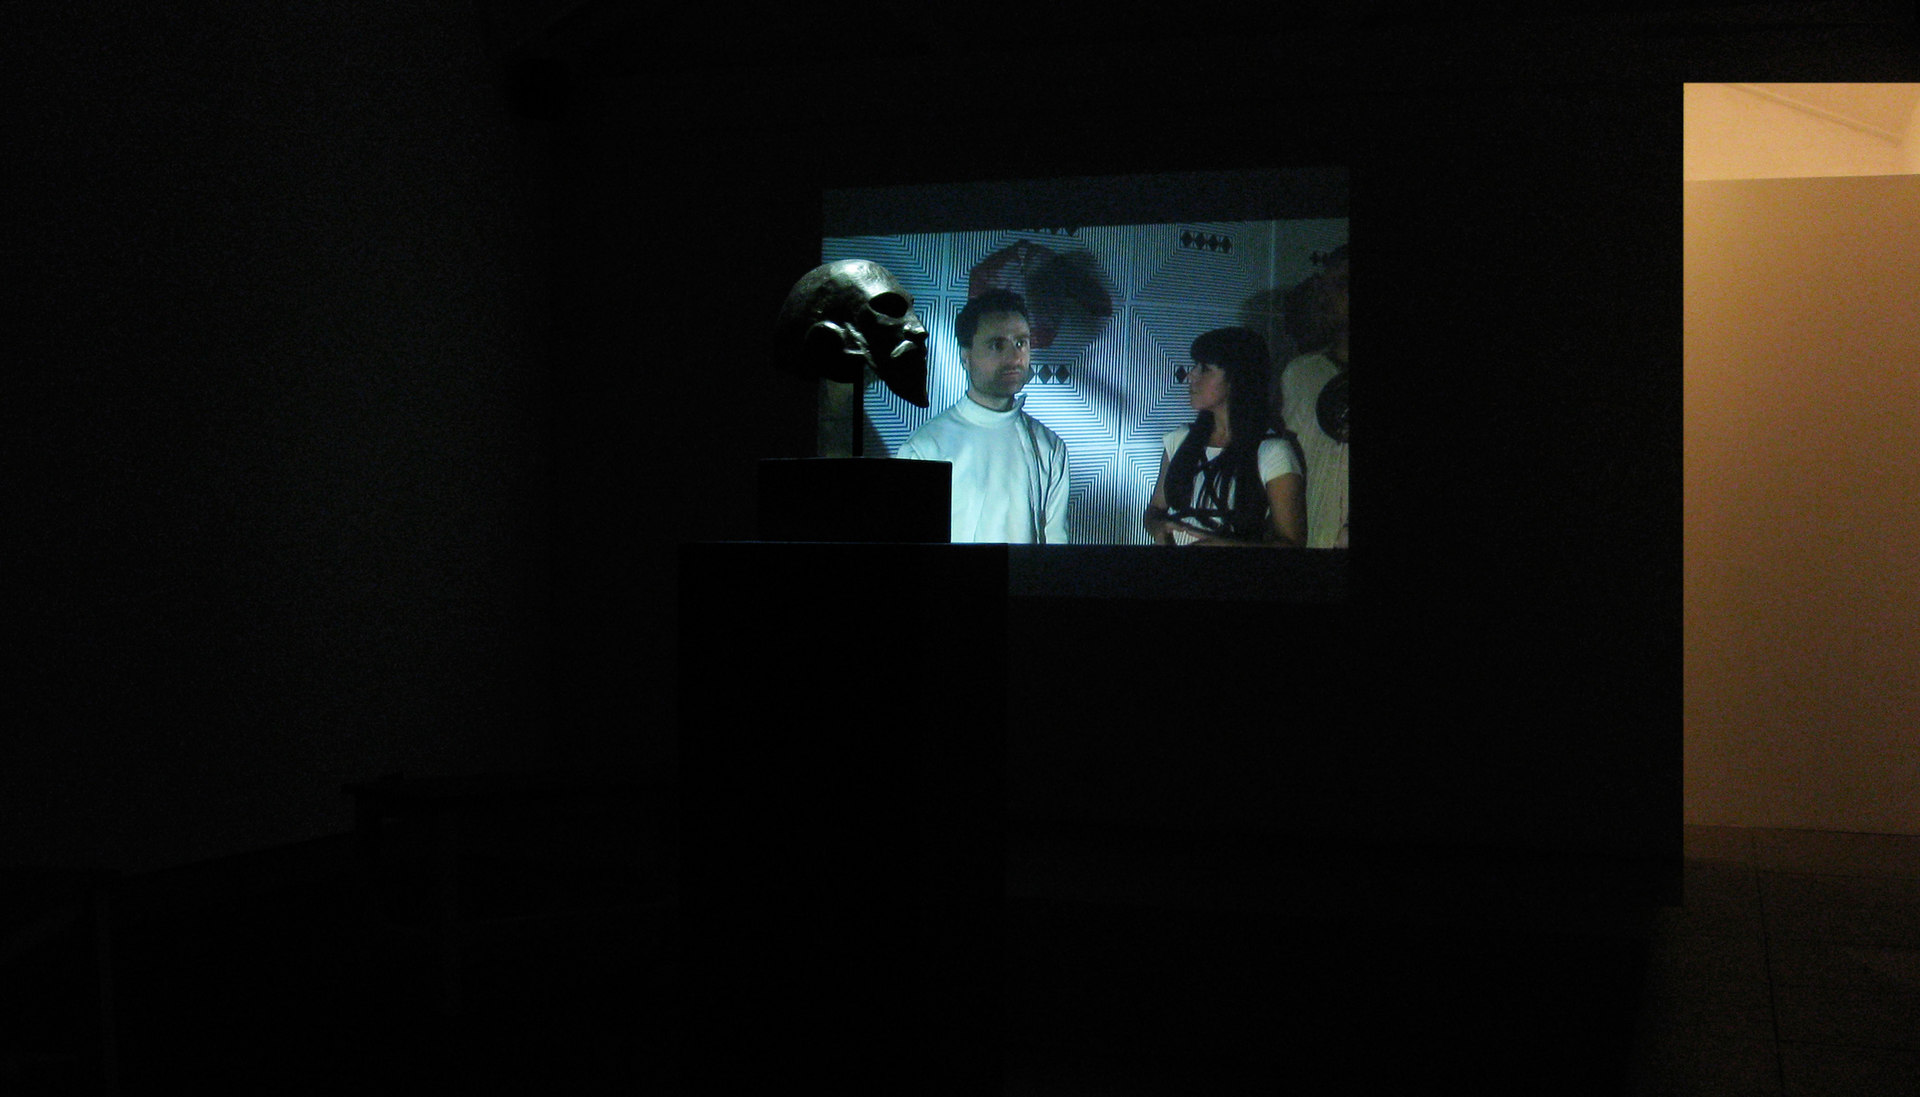 Mark Aerial Waller, 'Secret' still from Resistance Domination Secret, 2010, Cell Project Space